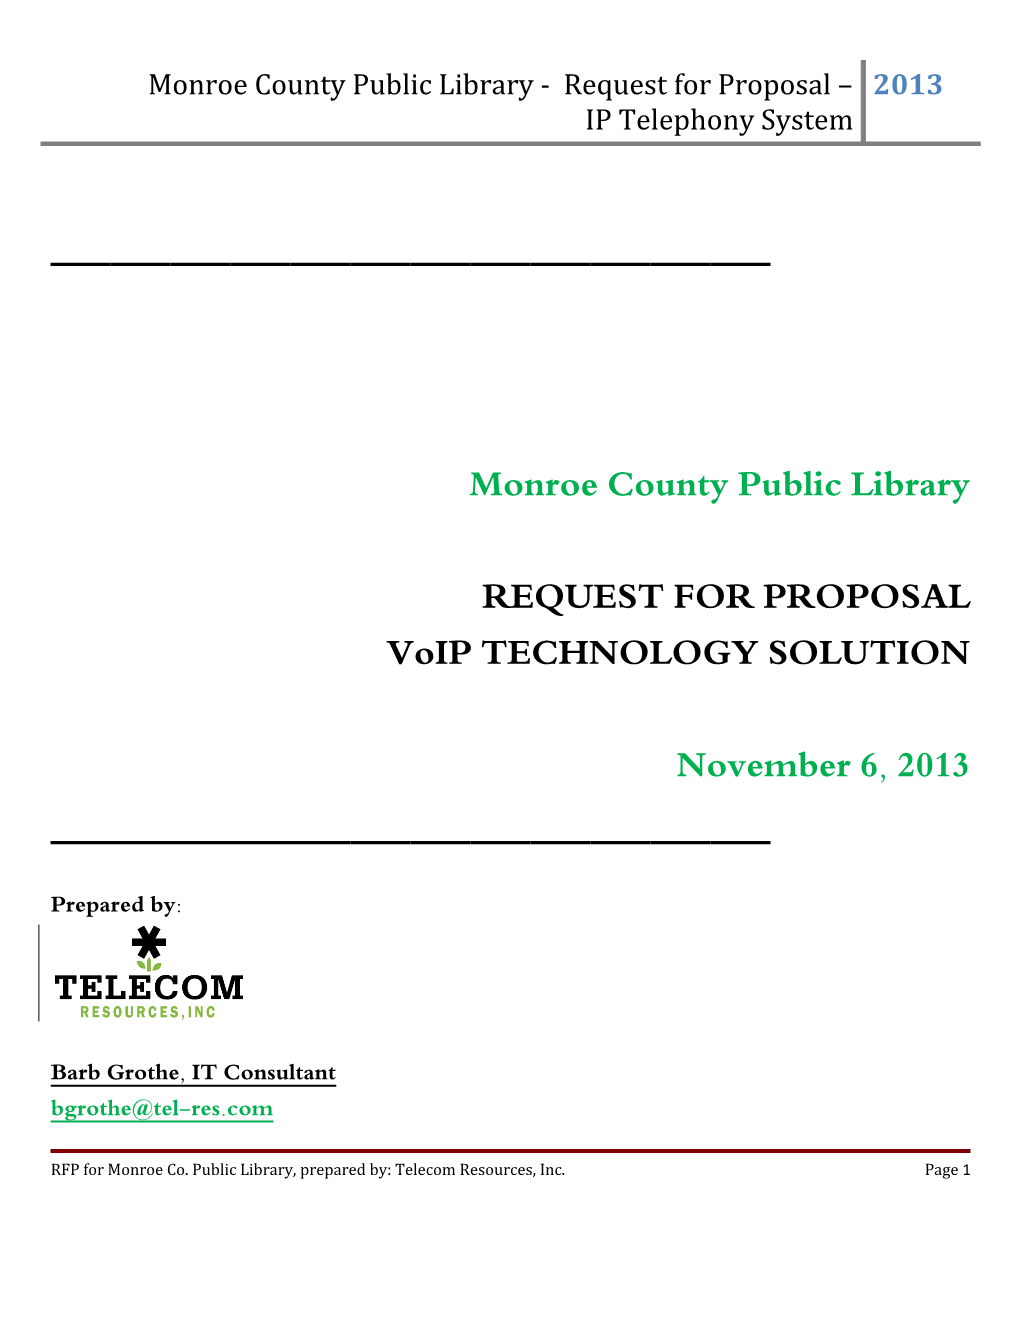 Monroe County Public Library - Request for Proposal IP Telephony System